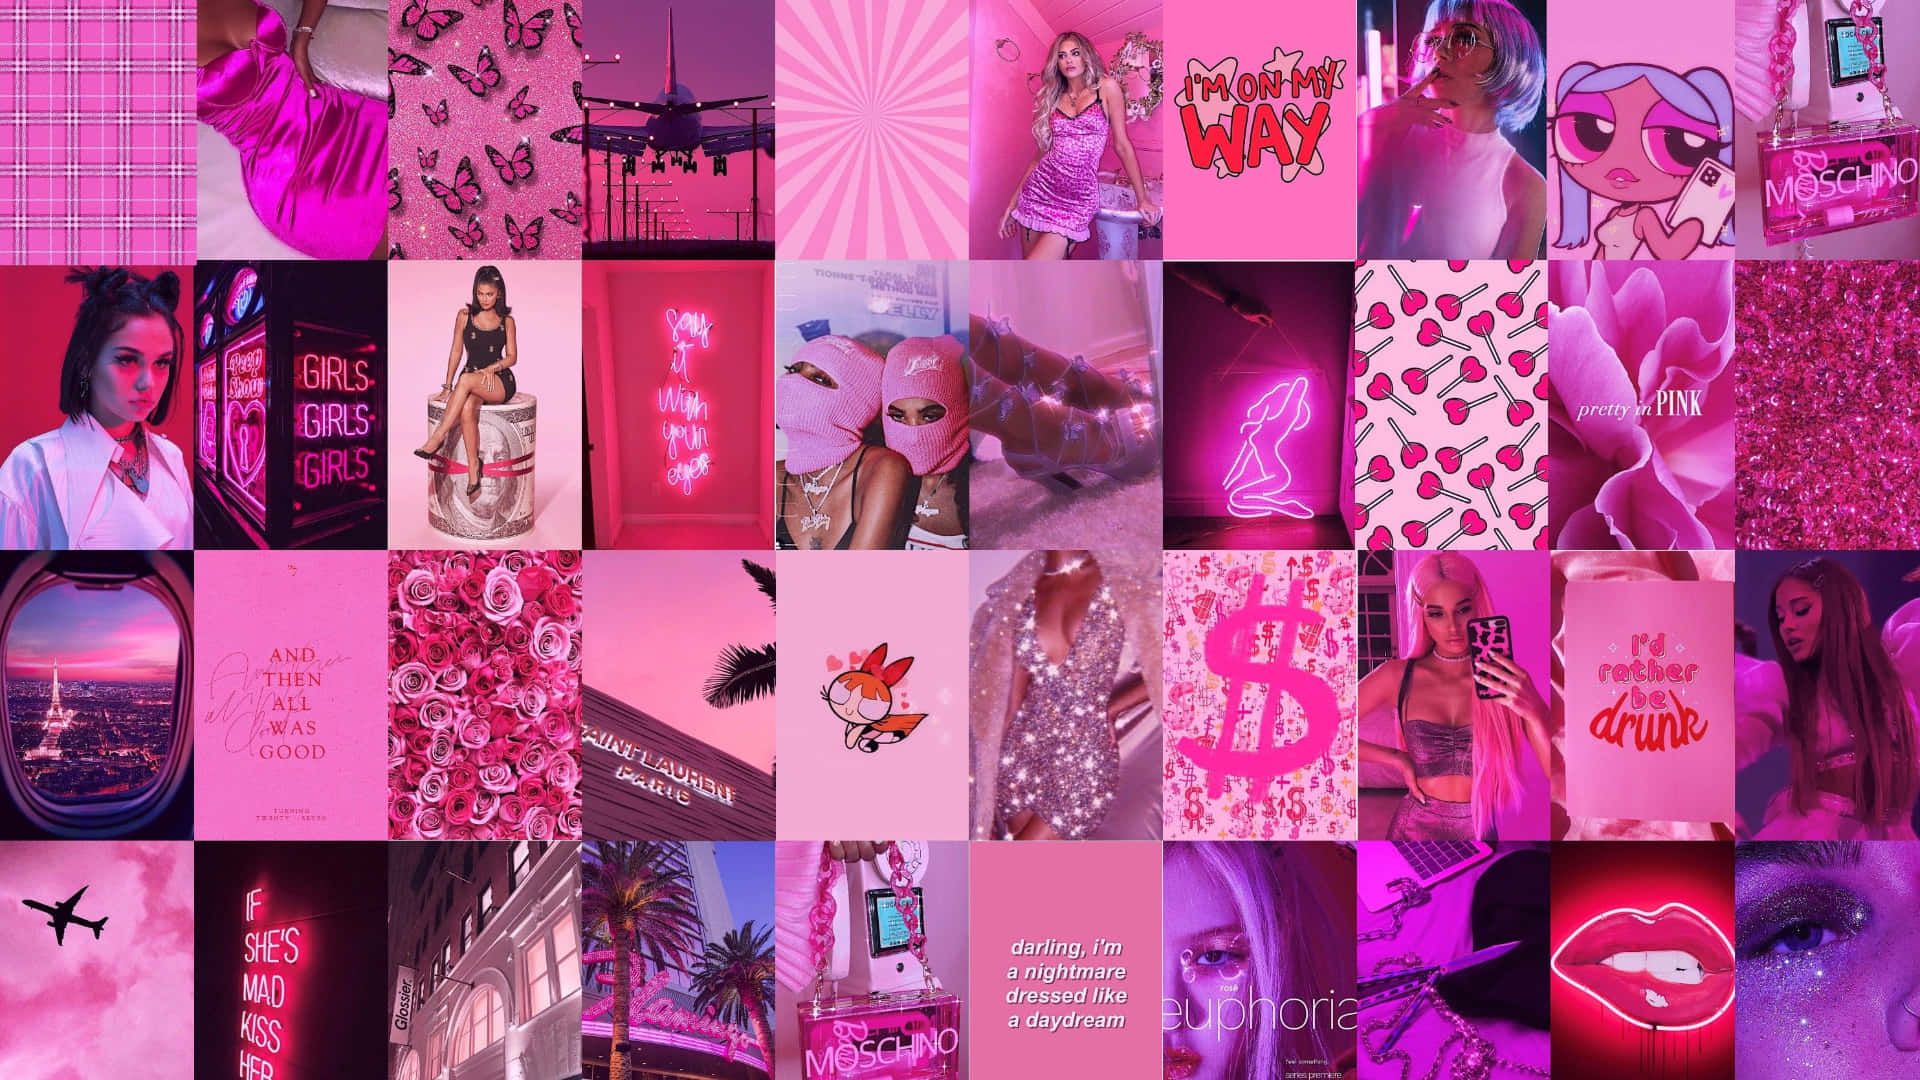 Aesthetic backgrounds for desktop and phone backgrounds. - Pink collage